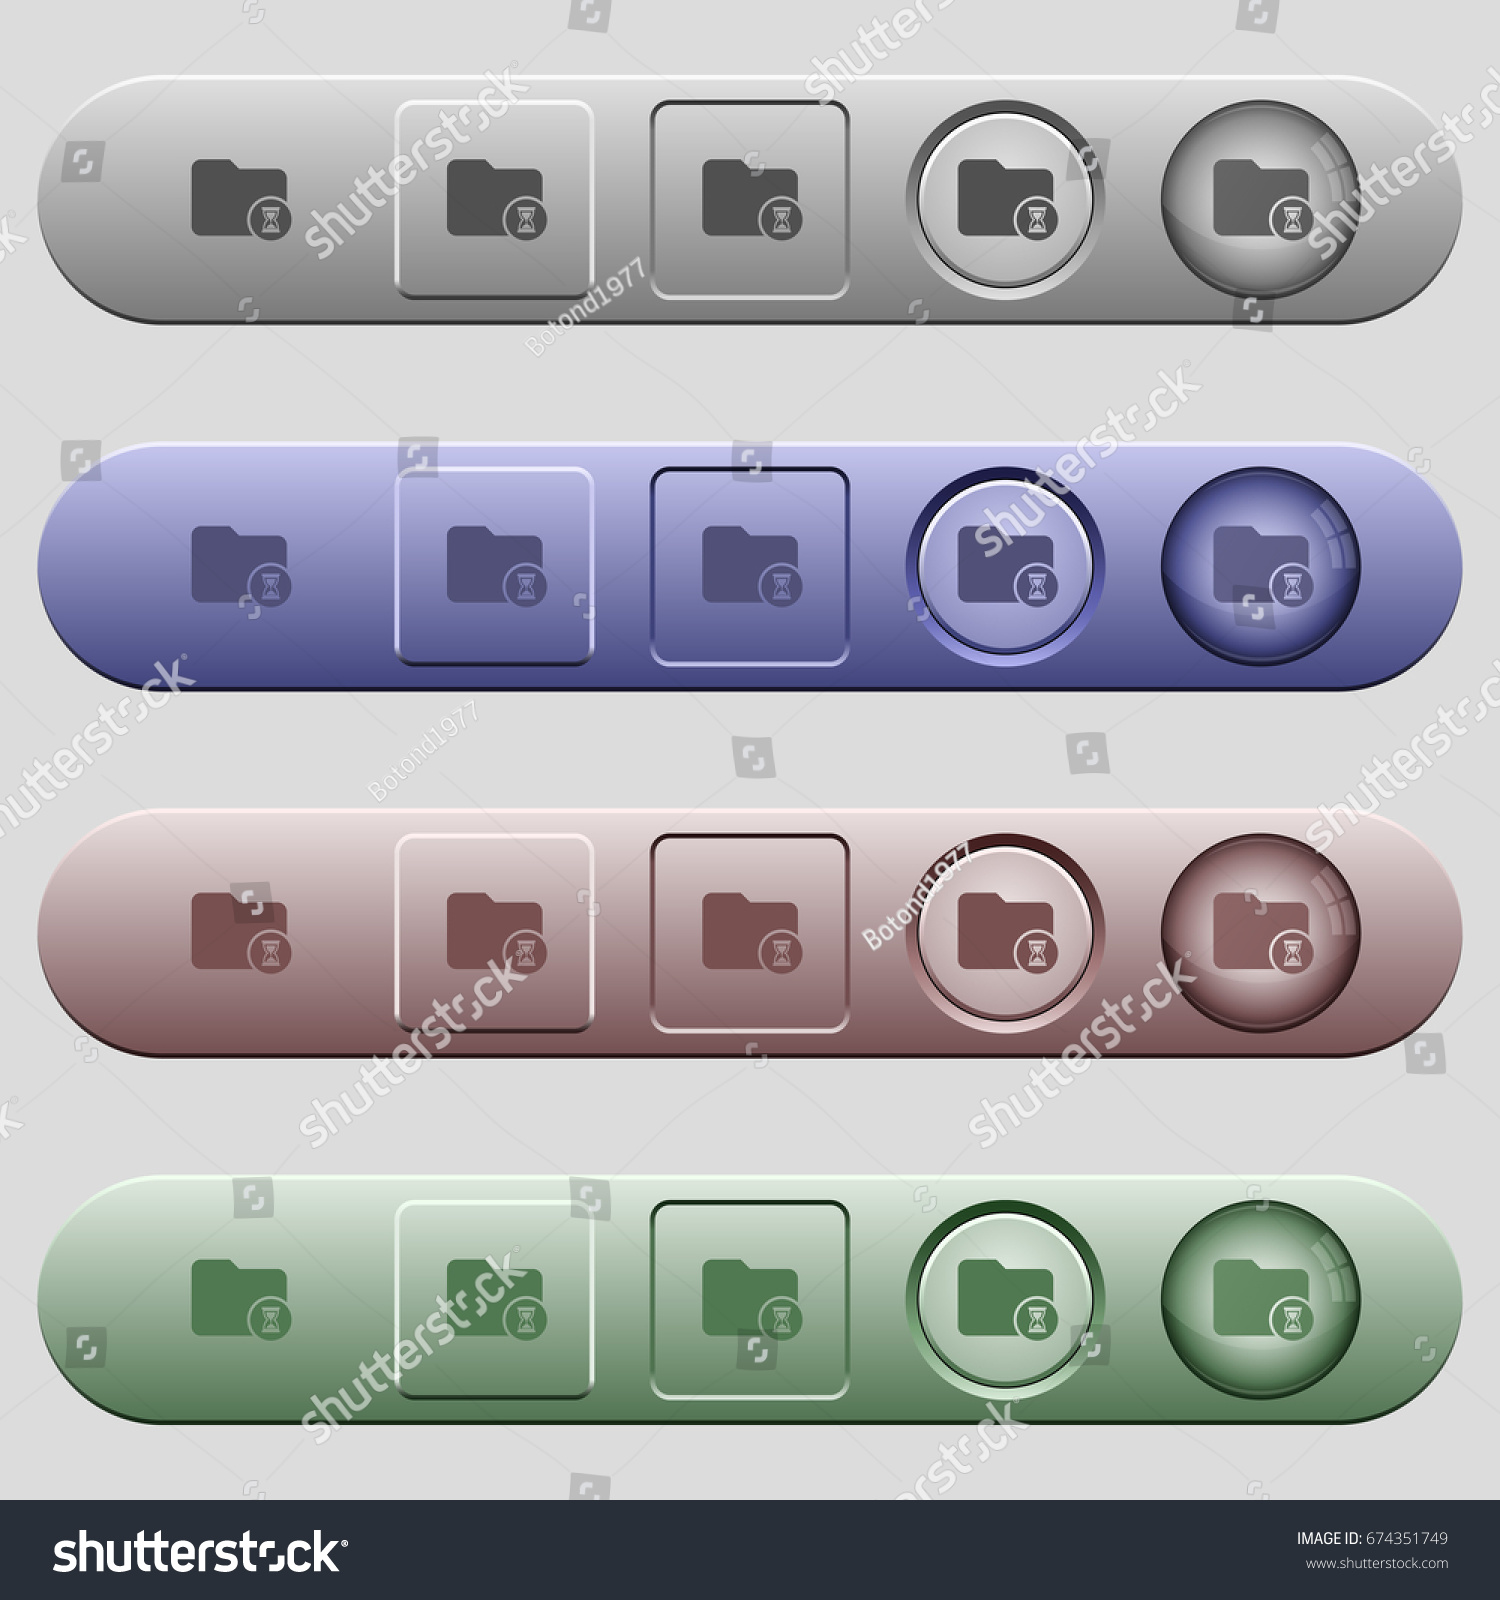 Directory processing icons on rounded horizontal menu bars in different colors and button styles #674351749